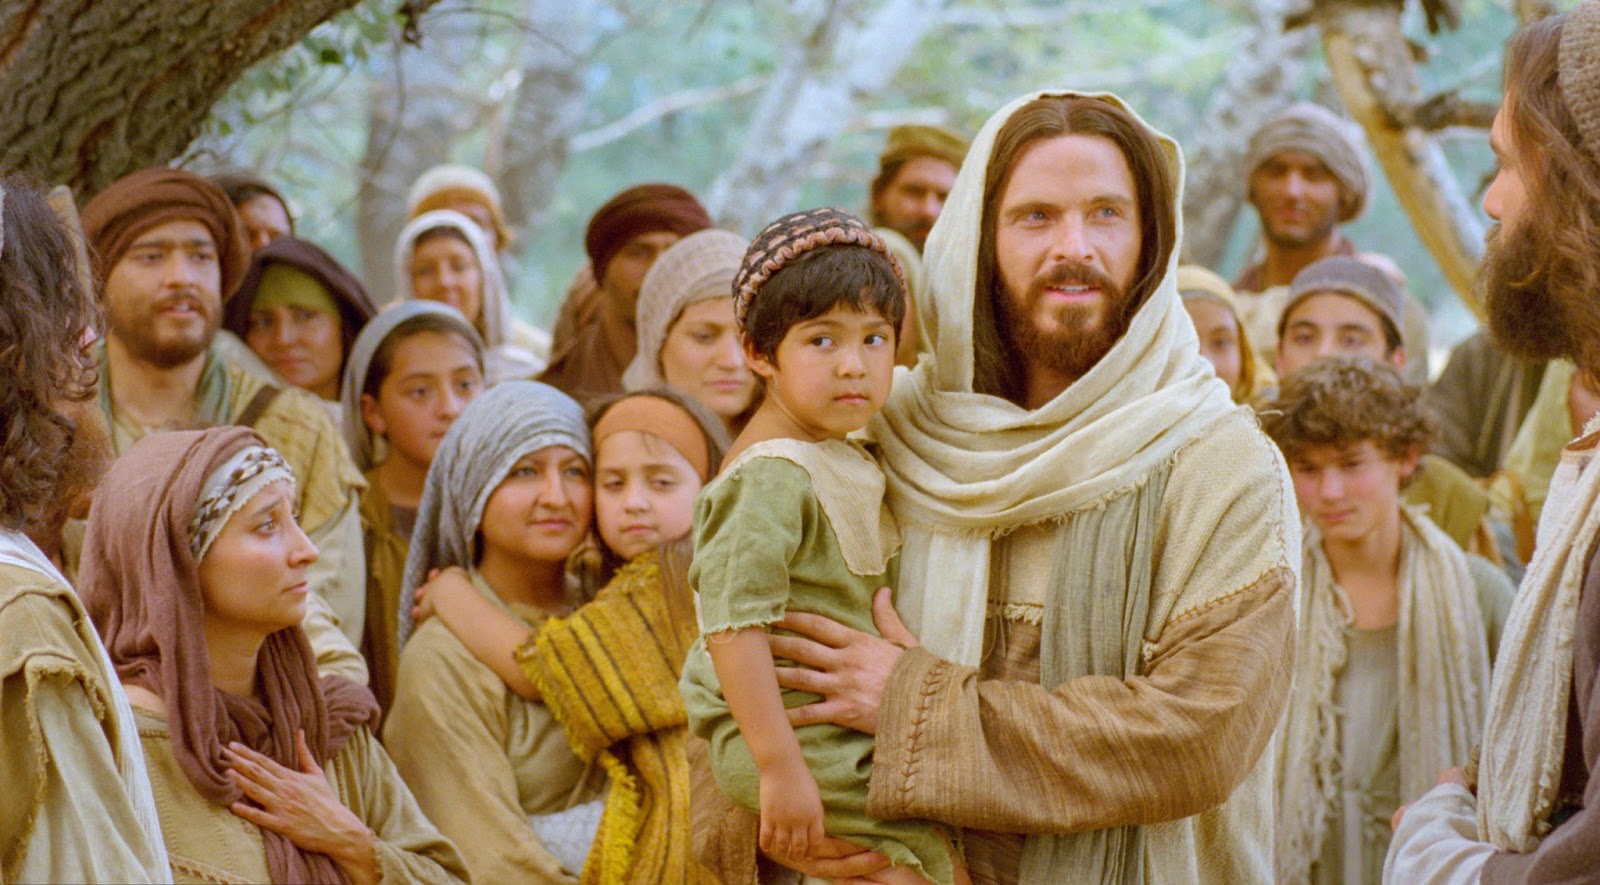 Today's Mass: Let the Children Come to Me.